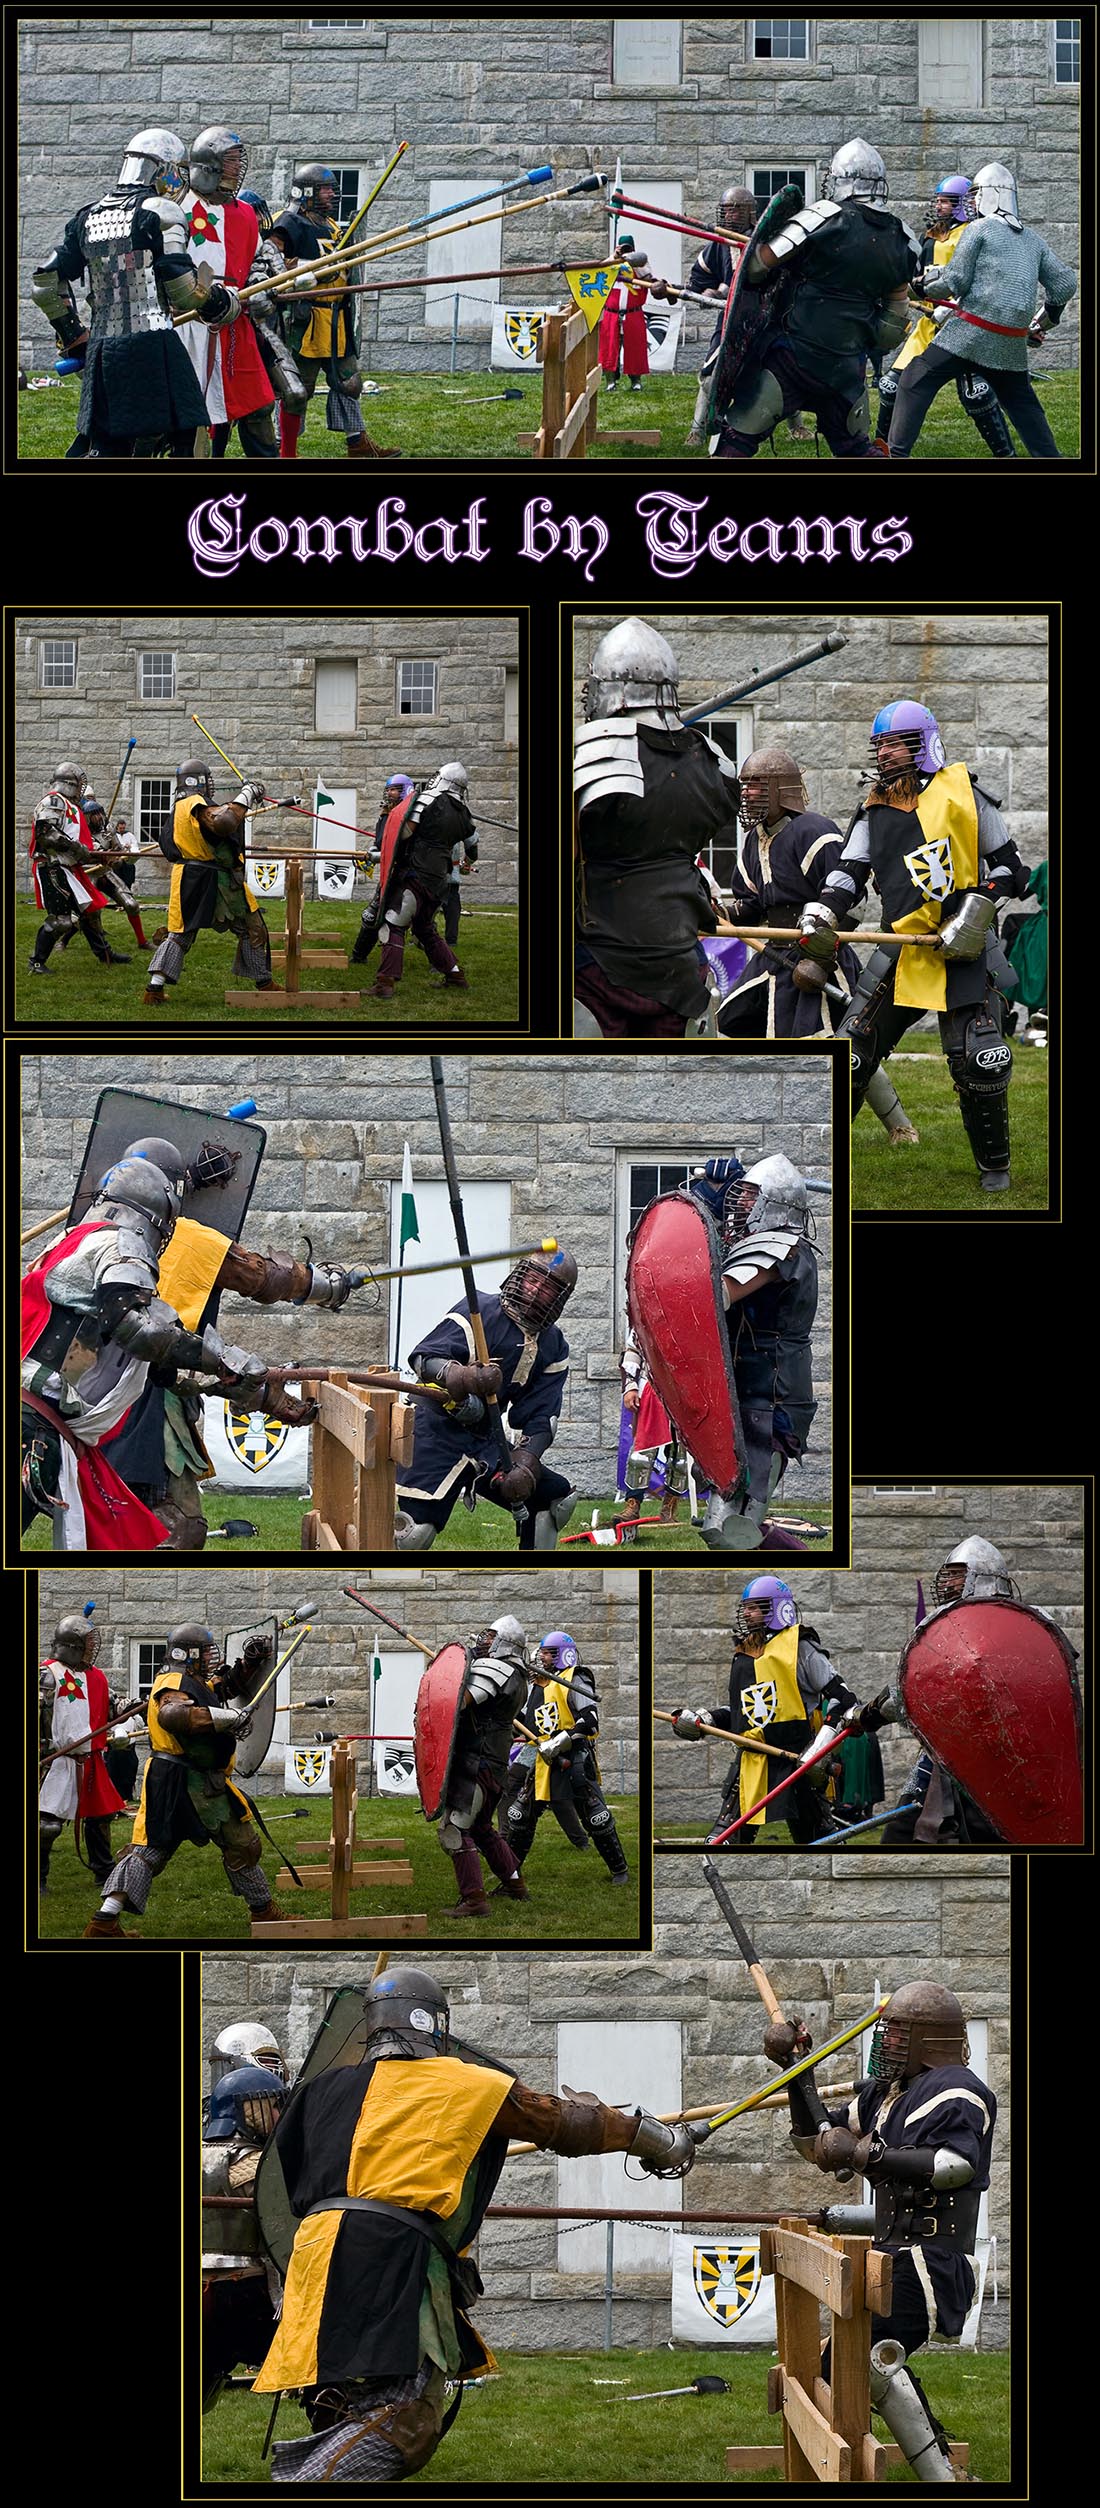 Views of the Pas d’Armes Tournament of Knightly Combat